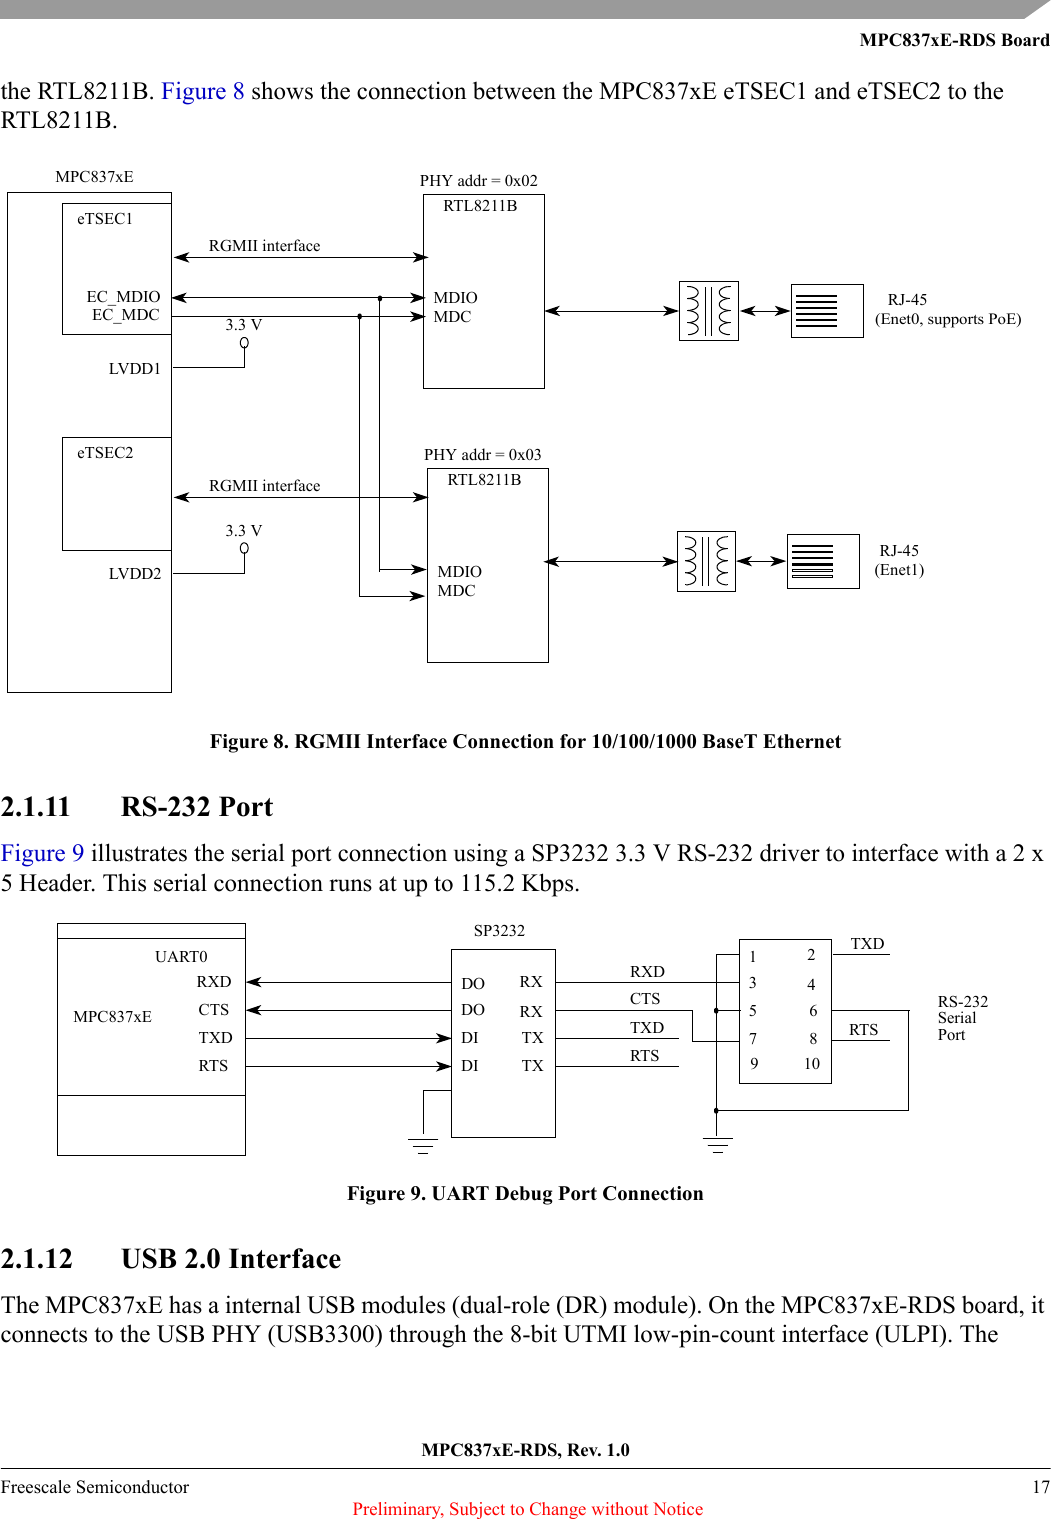 MPC837xE-RDS BoardMPC837xE-RDS, Rev. 1.0Freescale Semiconductor 17 Preliminary, Subject to Change without Noticethe RTL8211B. Figure 8 shows the connection between the MPC837xE eTSEC1 and eTSEC2 to the RTL8211B.Figure 8. RGMII Interface Connection for 10/100/1000 BaseT Ethernet2.1.11 RS-232 PortFigure 9 illustrates the serial port connection using a SP3232 3.3 V RS-232 driver to interface with a 2 x 5 Header. This serial connection runs at up to 115.2 Kbps.Figure 9. UART Debug Port Connection2.1.12 USB 2.0 InterfaceThe MPC837xE has a internal USB modules (dual-role (DR) module). On the MPC837xE-RDS board, it connects to the USB PHY (USB3300) through the 8-bit UTMI low-pin-count interface (ULPI). The RJ-45eTSEC1MPC837xERTL8211BMDIOMDCEC_MDIOEC_MDCRGMII interfacePHY addr = 0x02eTSEC23.3 VLVDD2RJ-45(Enet0, supports PoE)(Enet1)3.3 VLVDD1RGMII interface RTL8211BMDIOMDCPHY addr = 0x03SP3232TXDRXDCTSRXTXTXDODIDIMPC837xERTSRS-232SerialPortRXRXDRTSTXDCTSDOUART046837521910TXDRTS